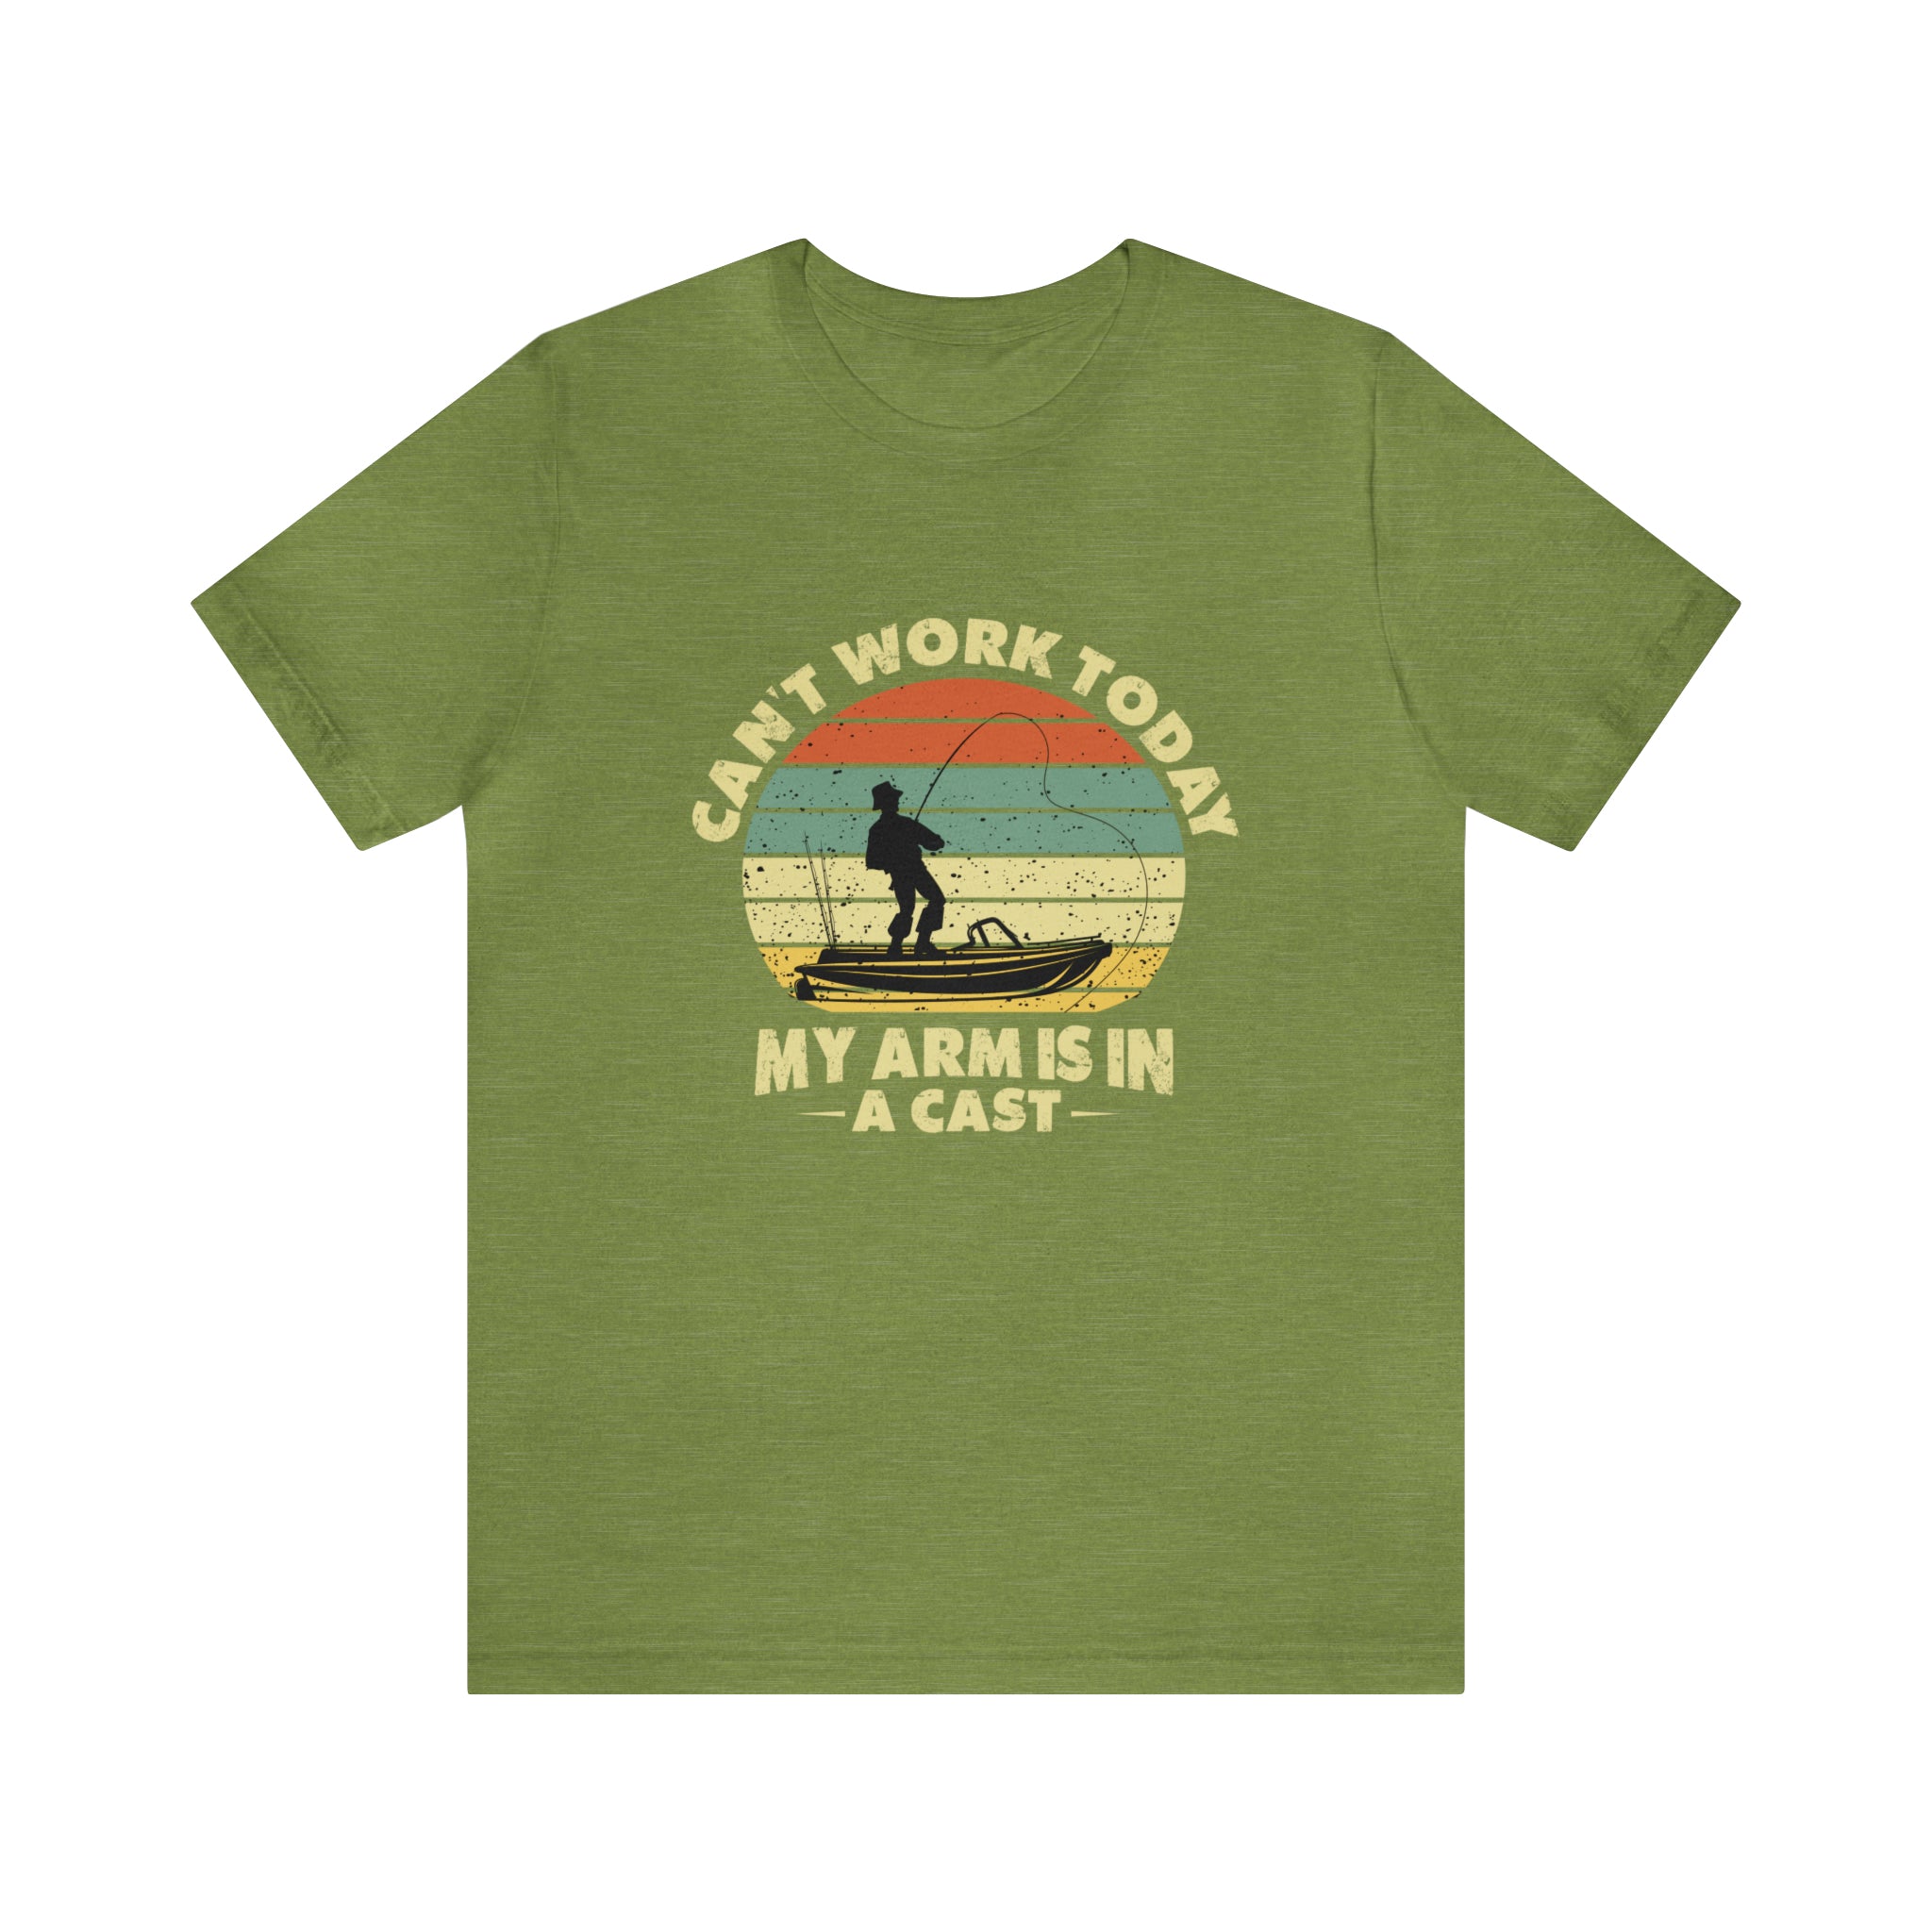 A quirky Can't work today T-shirt.